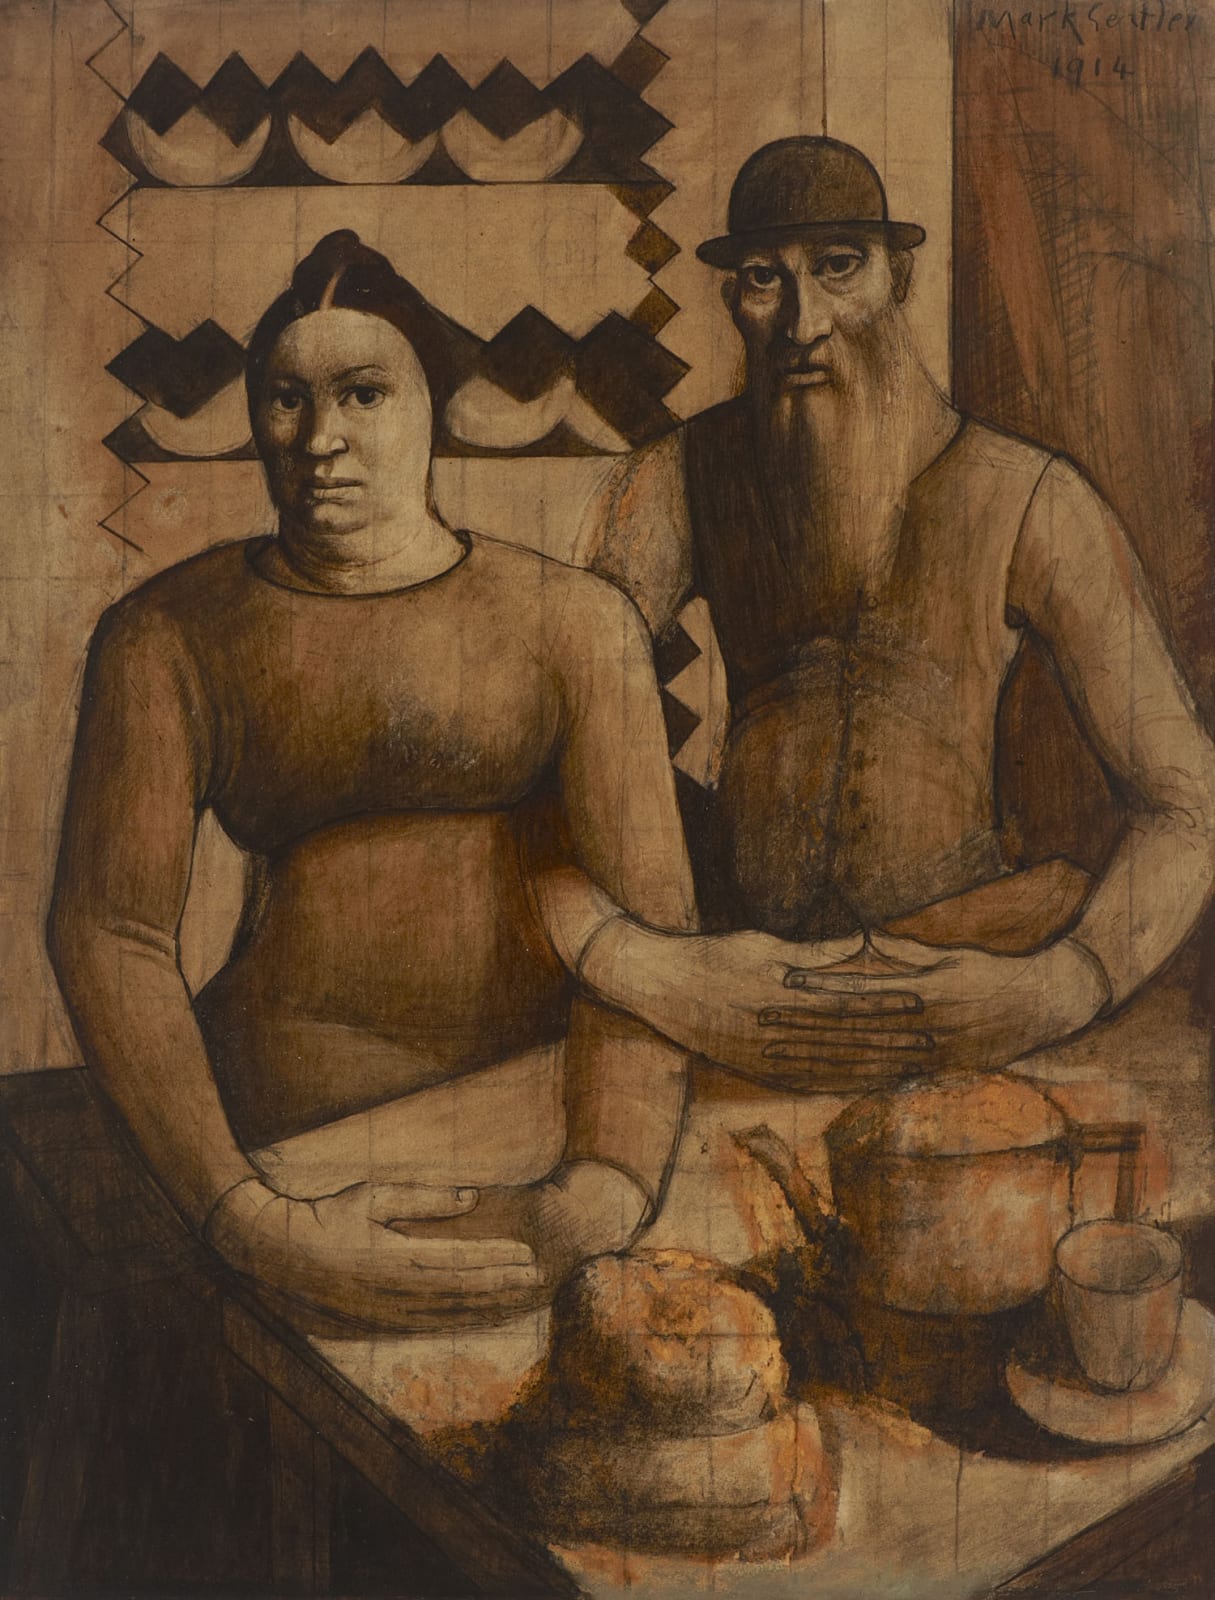 Mark Gertler (1891-1939) Rabbi and Rabbitzin 1914 Watercolour and pencil on paper 48.8 x 37.6 cm Ben Uri Collection Acquired in 2002 by private treaty through Sotheby's with the assistance of Art Fund, HLF, V&A/MLA Purchase Grant Fund, Pauline and Daniel Auerbach, Sir Michael and Lady Heller, Agnes and Edward Lee, Hannah and David Lewis, David Stern, Laura and Barry Townsley, Della and Fred Worms and anonymous donors